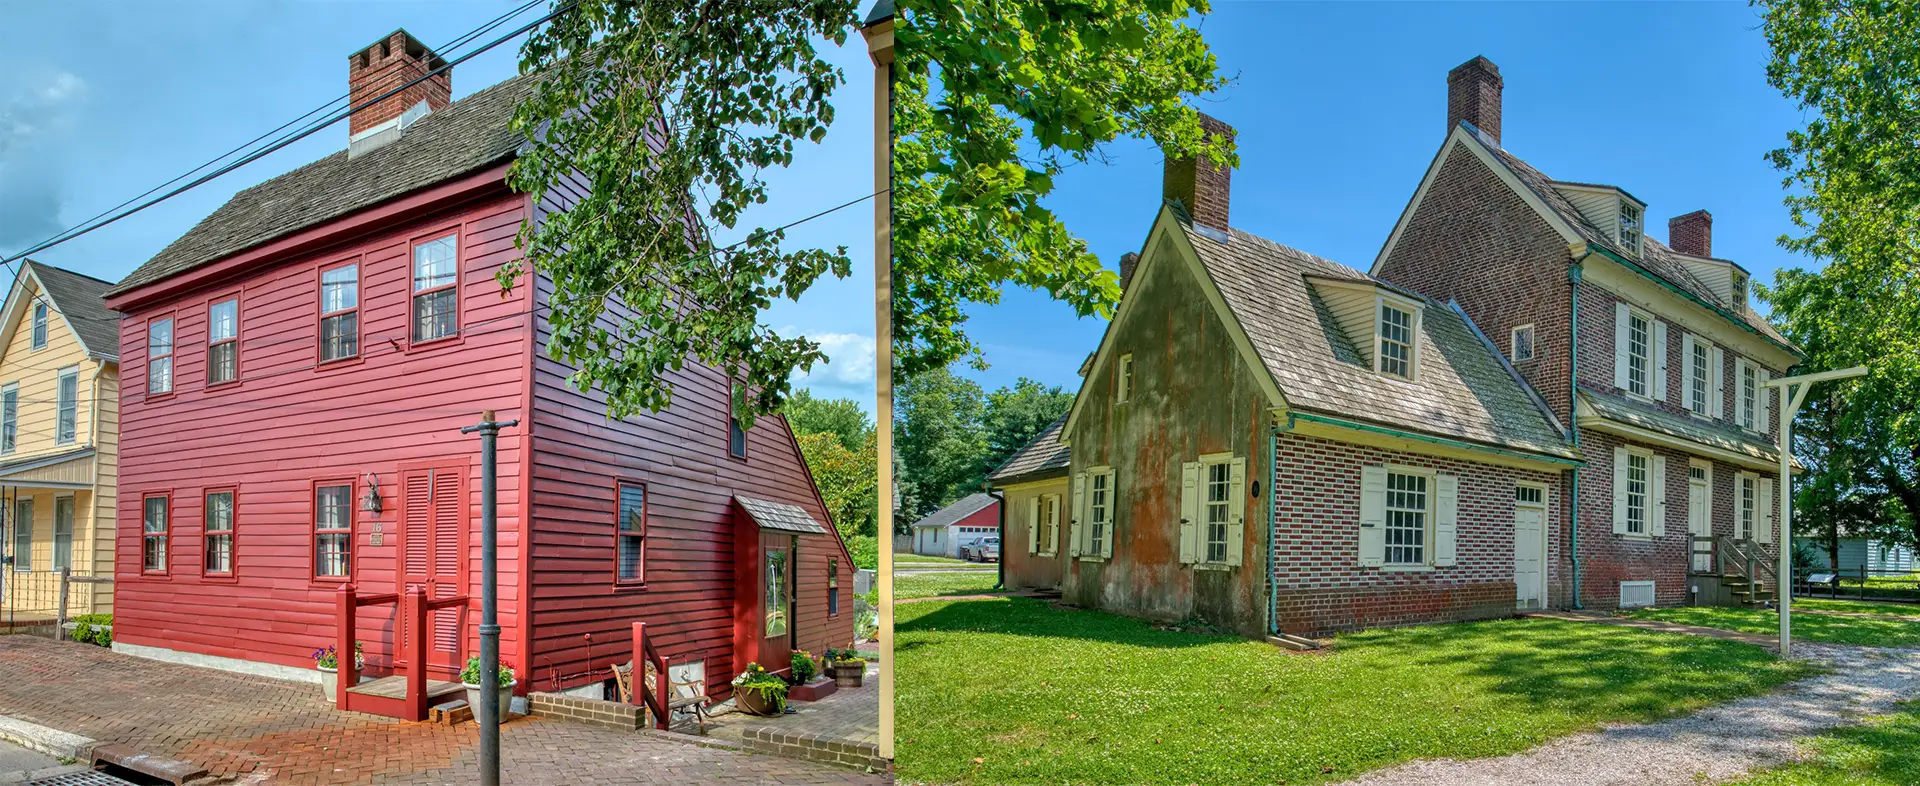 Two historic houses - one painted red and one brick